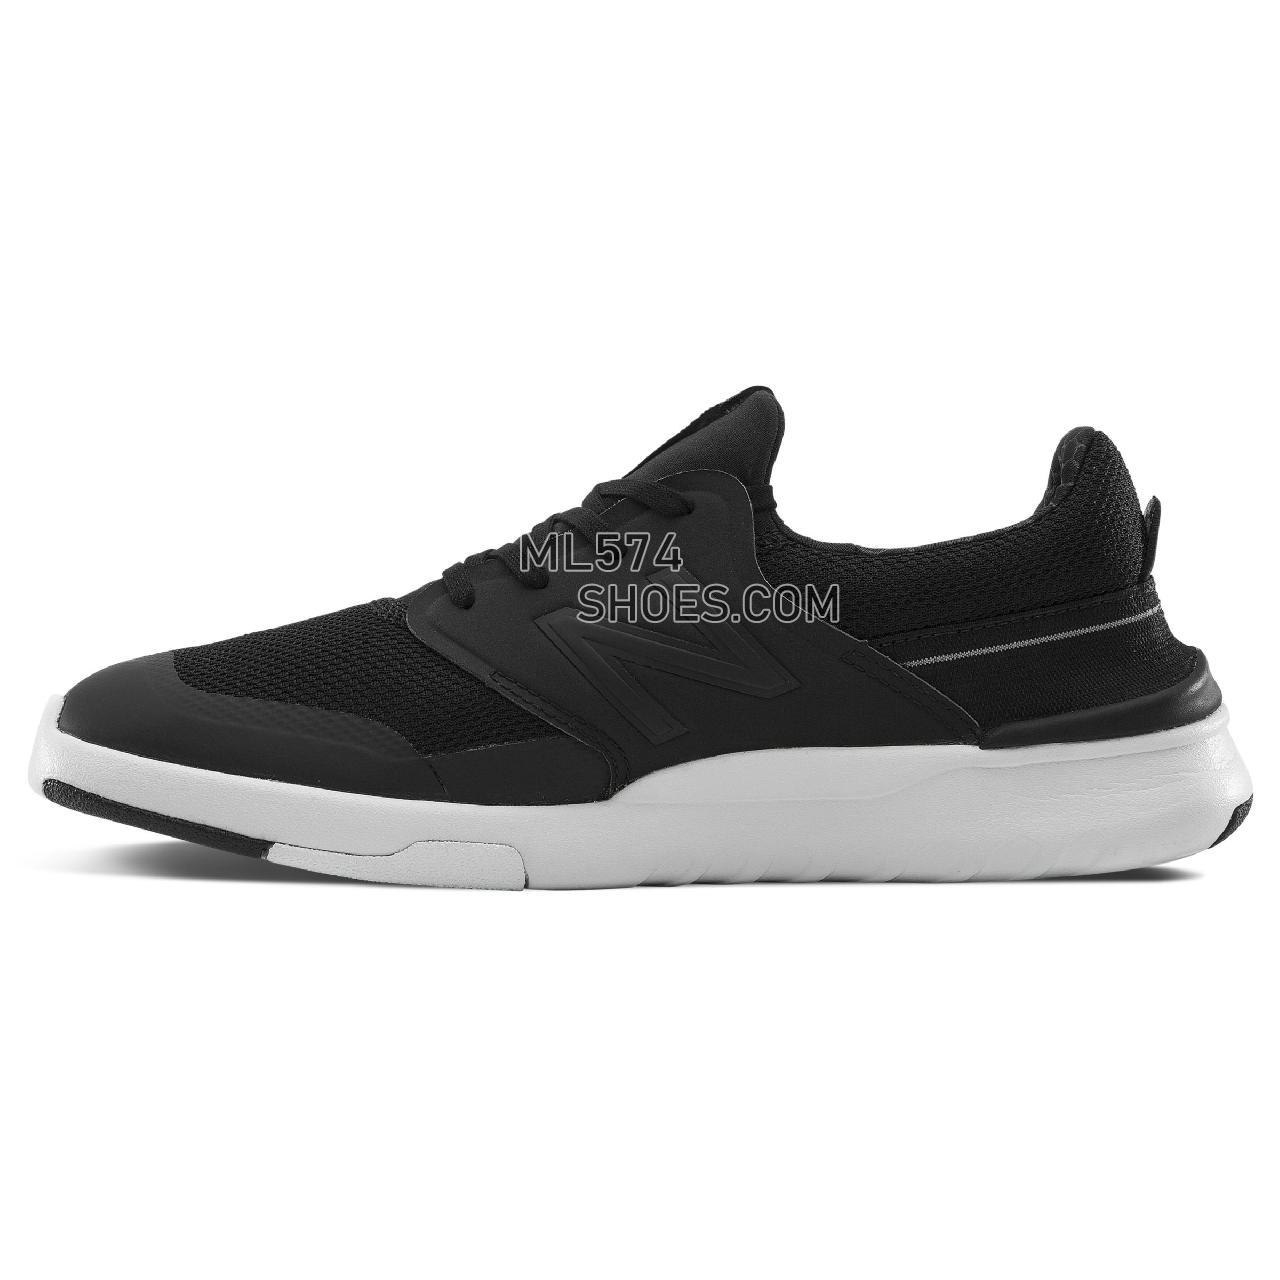 New Balance 659 - Men's 659 - Classic Black with White - AM659BKW